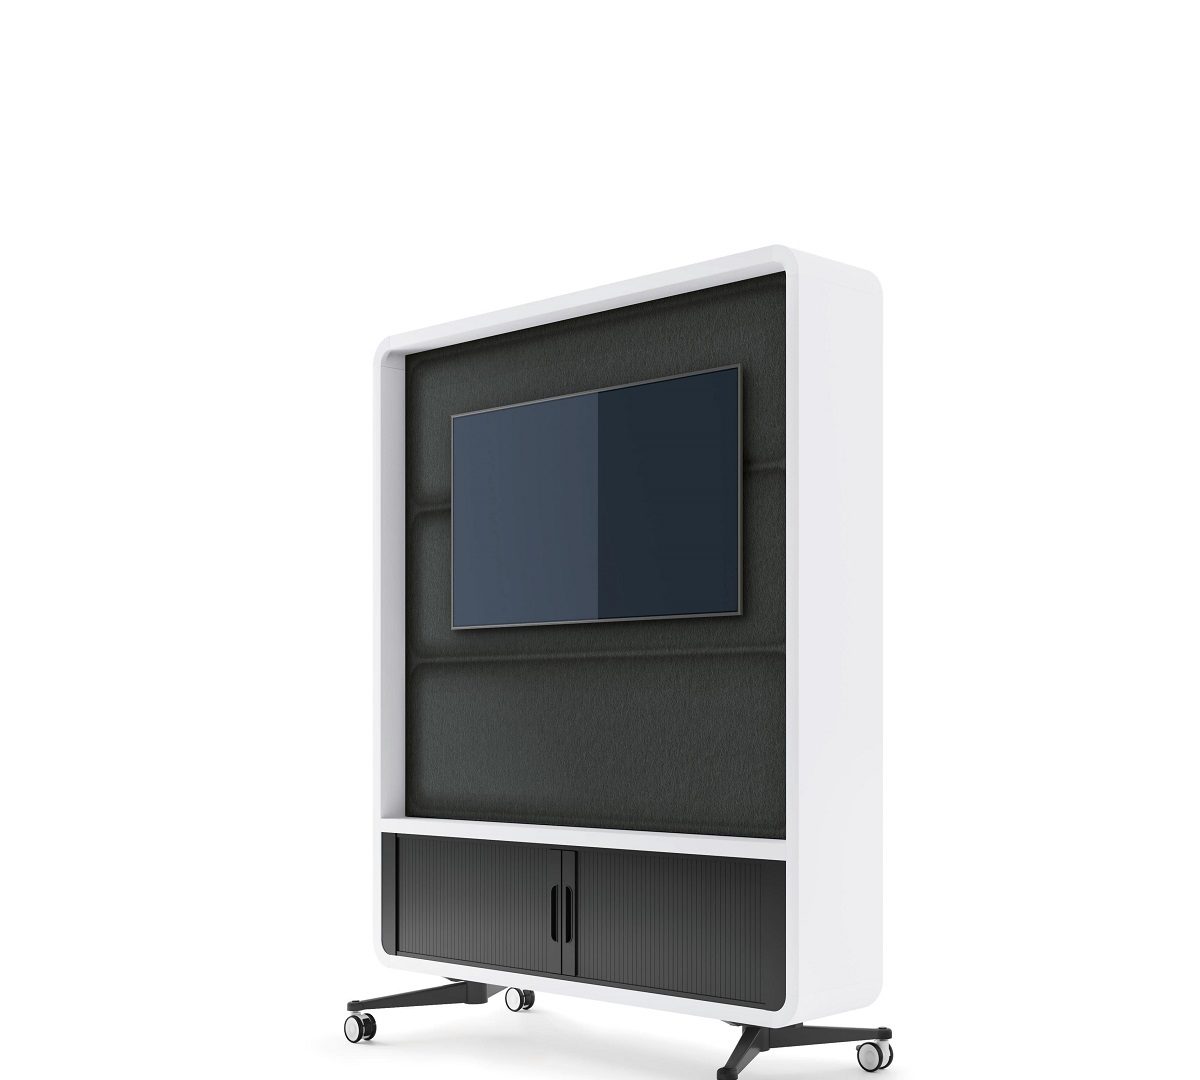 Modular office dividers increase visual and architectural privacy.